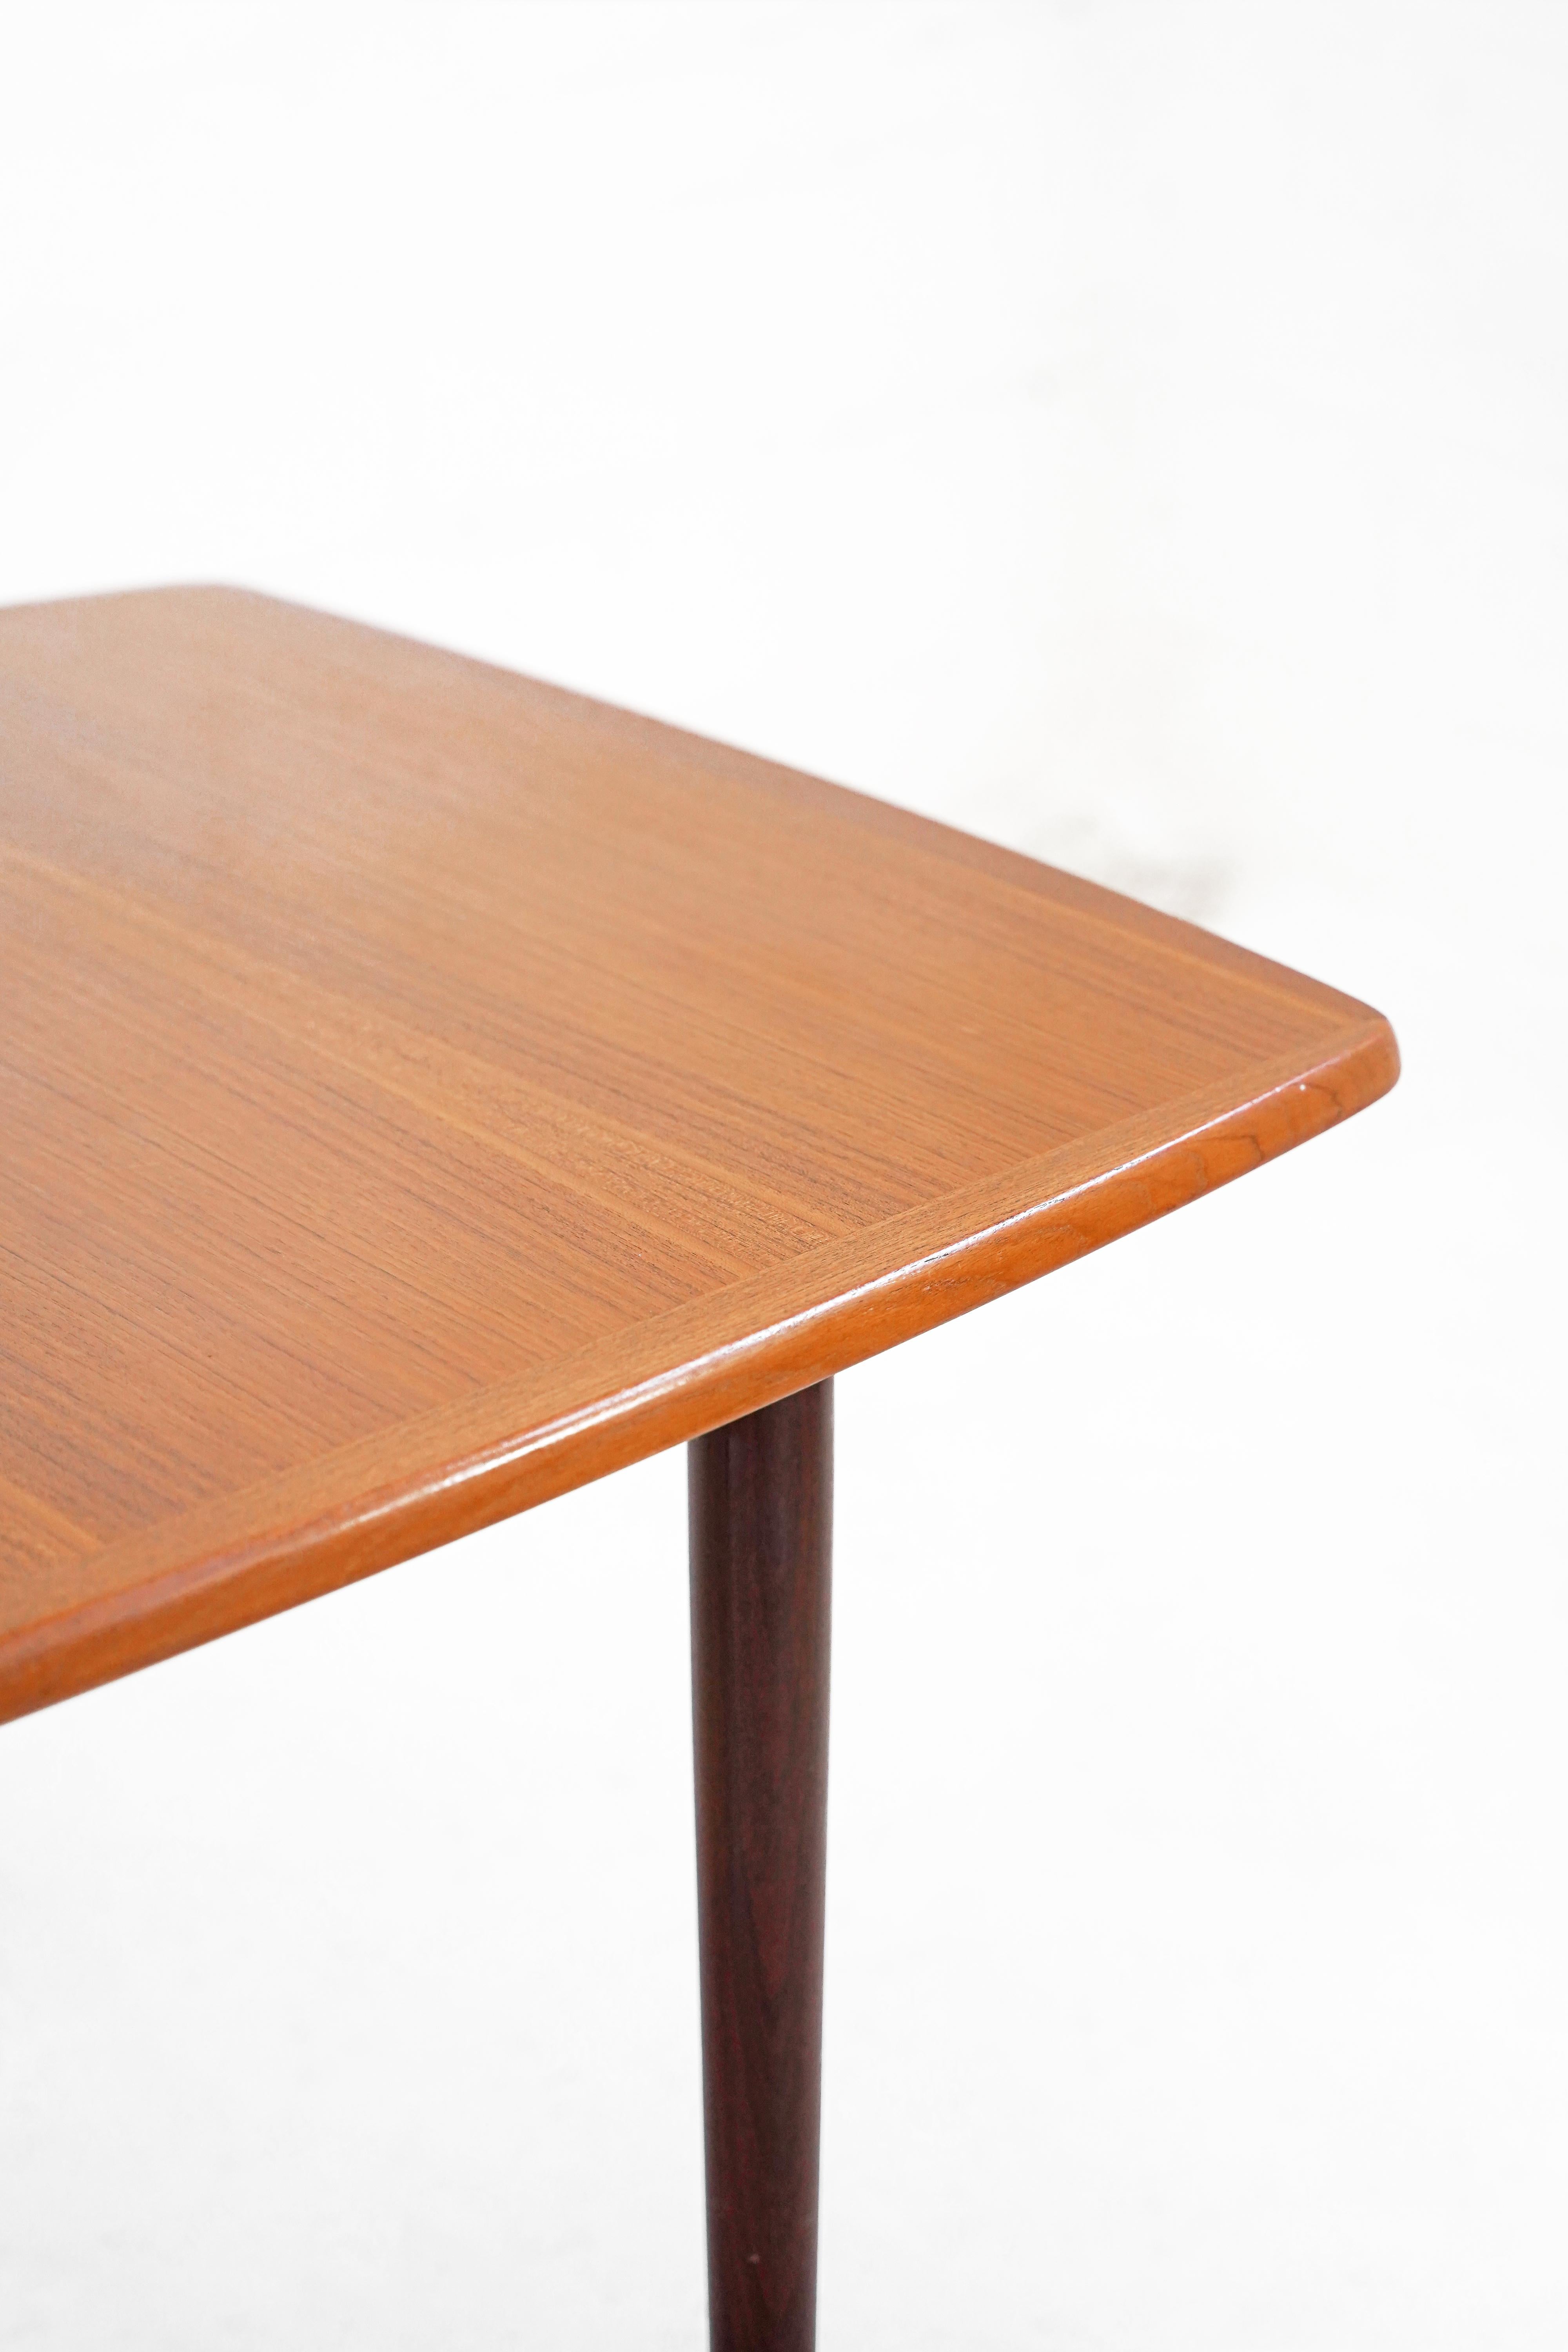 Mid-20th Century Teak Dining Table with Extension Leaves by Alf Aarseth for Gustav Bahus